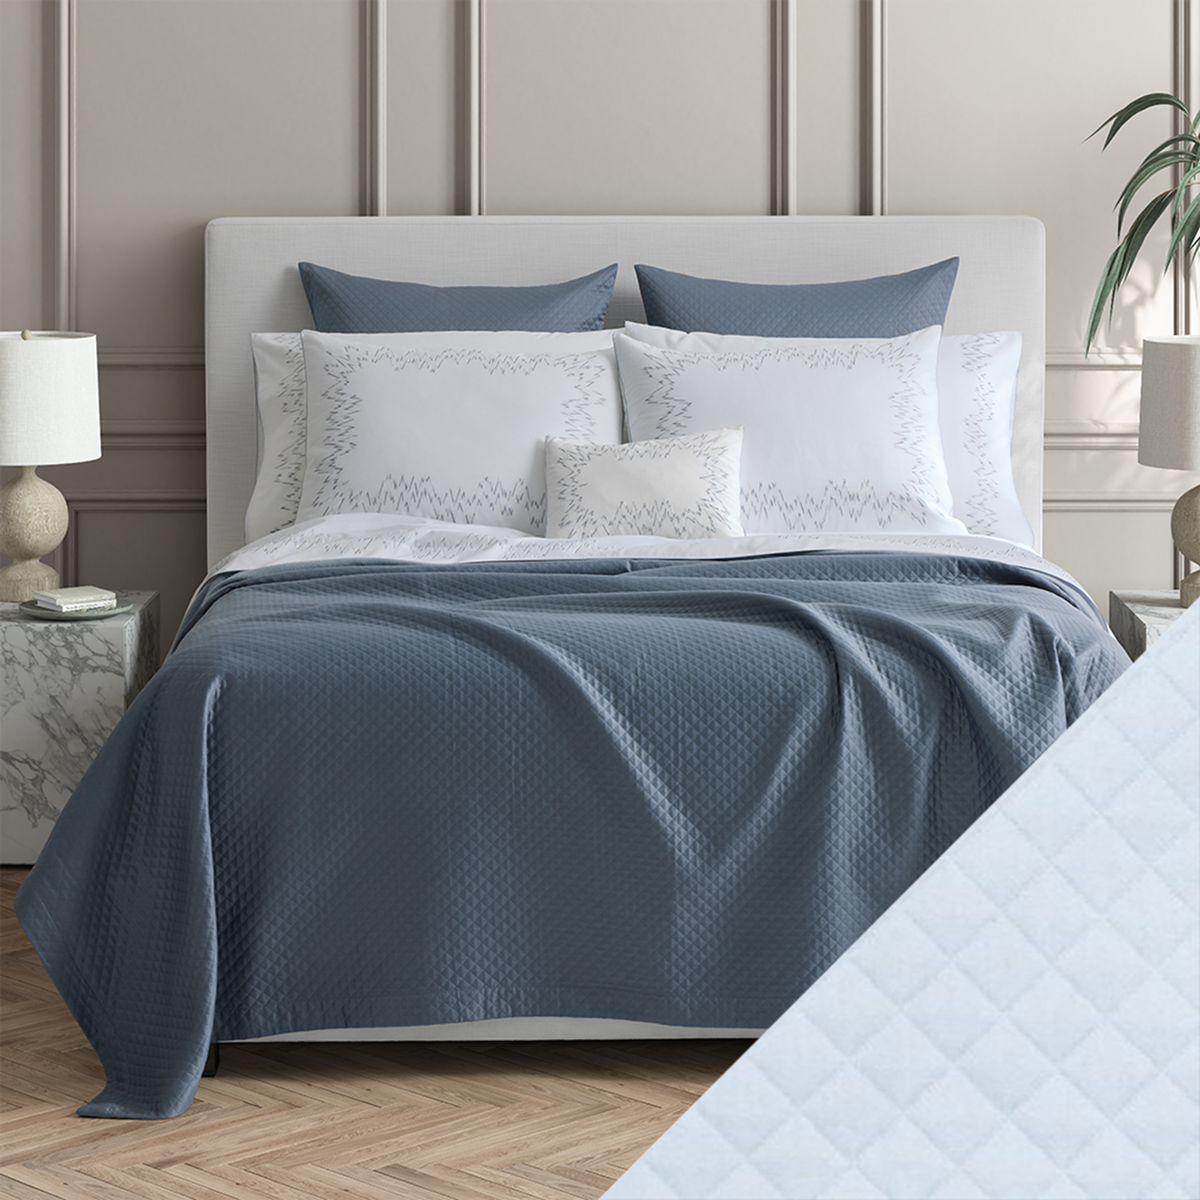 Bed Dressed in Matouk Petra Bedding with Swatch in Color Light Blue